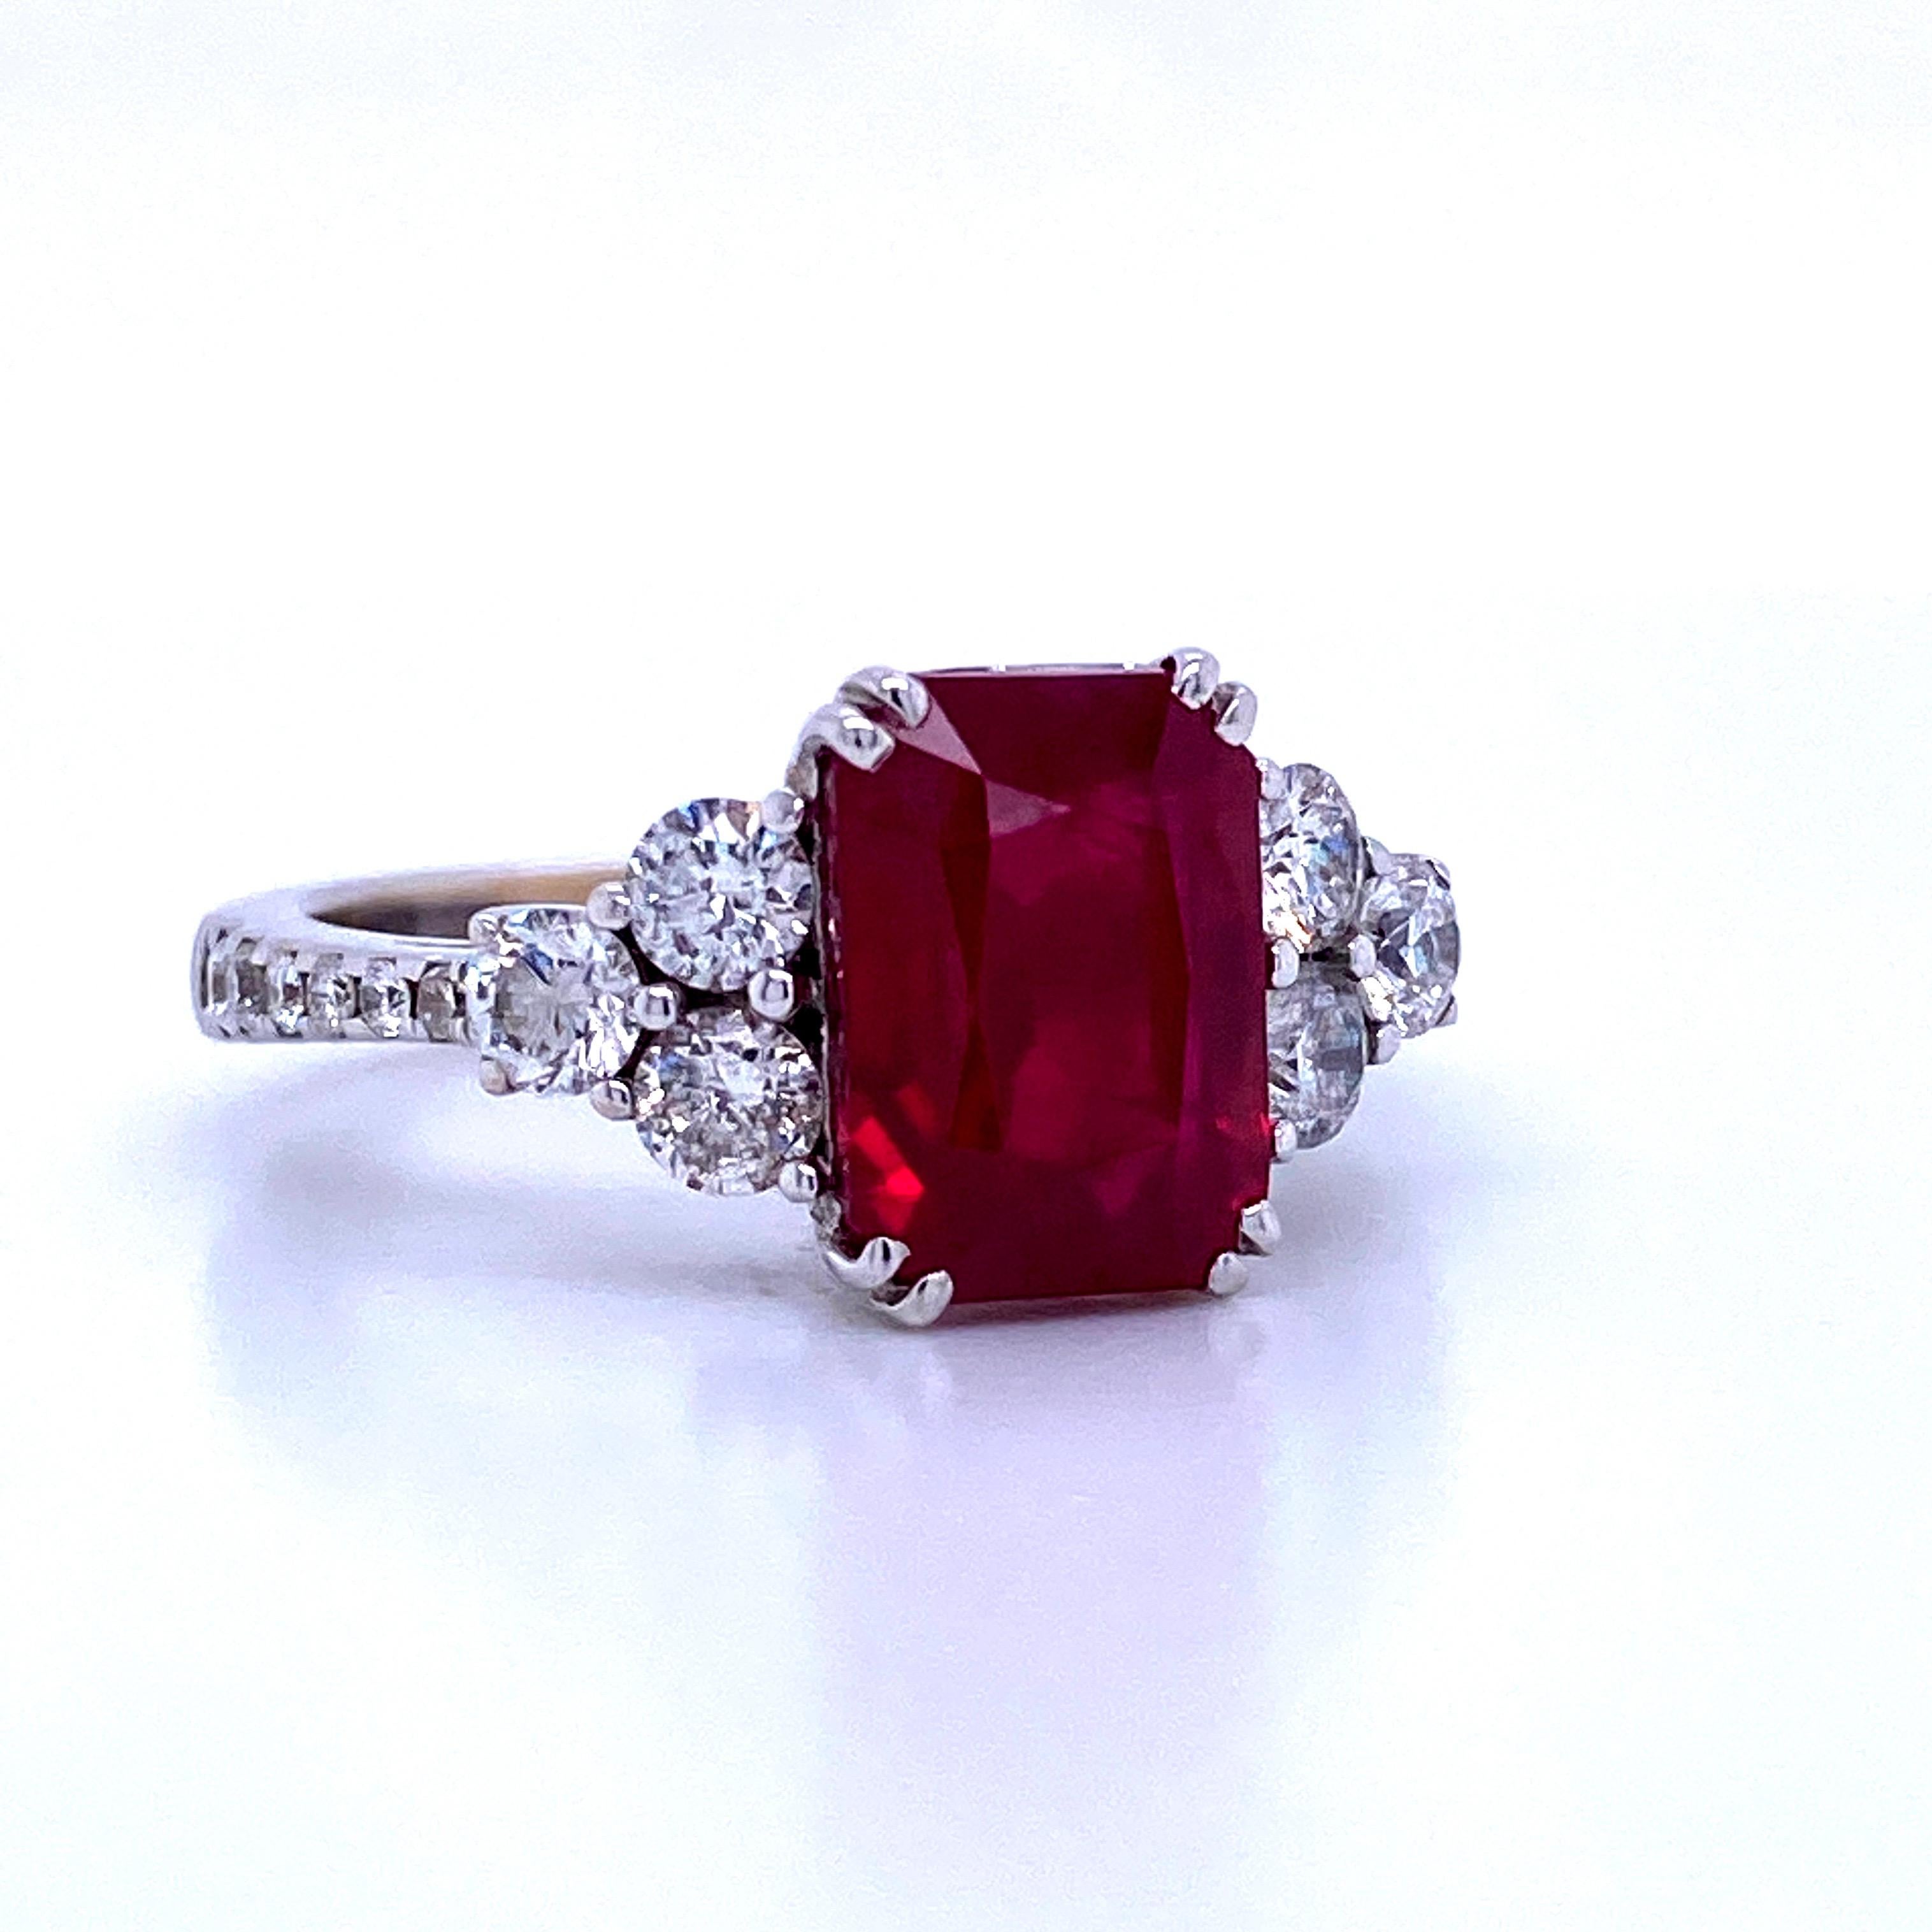 18K White gold ring featuring one Burma Ruby weighing 3.99 carats flanked with round brilliants weighing 0.80 carats. AGL Certified. 
A true beauty! 